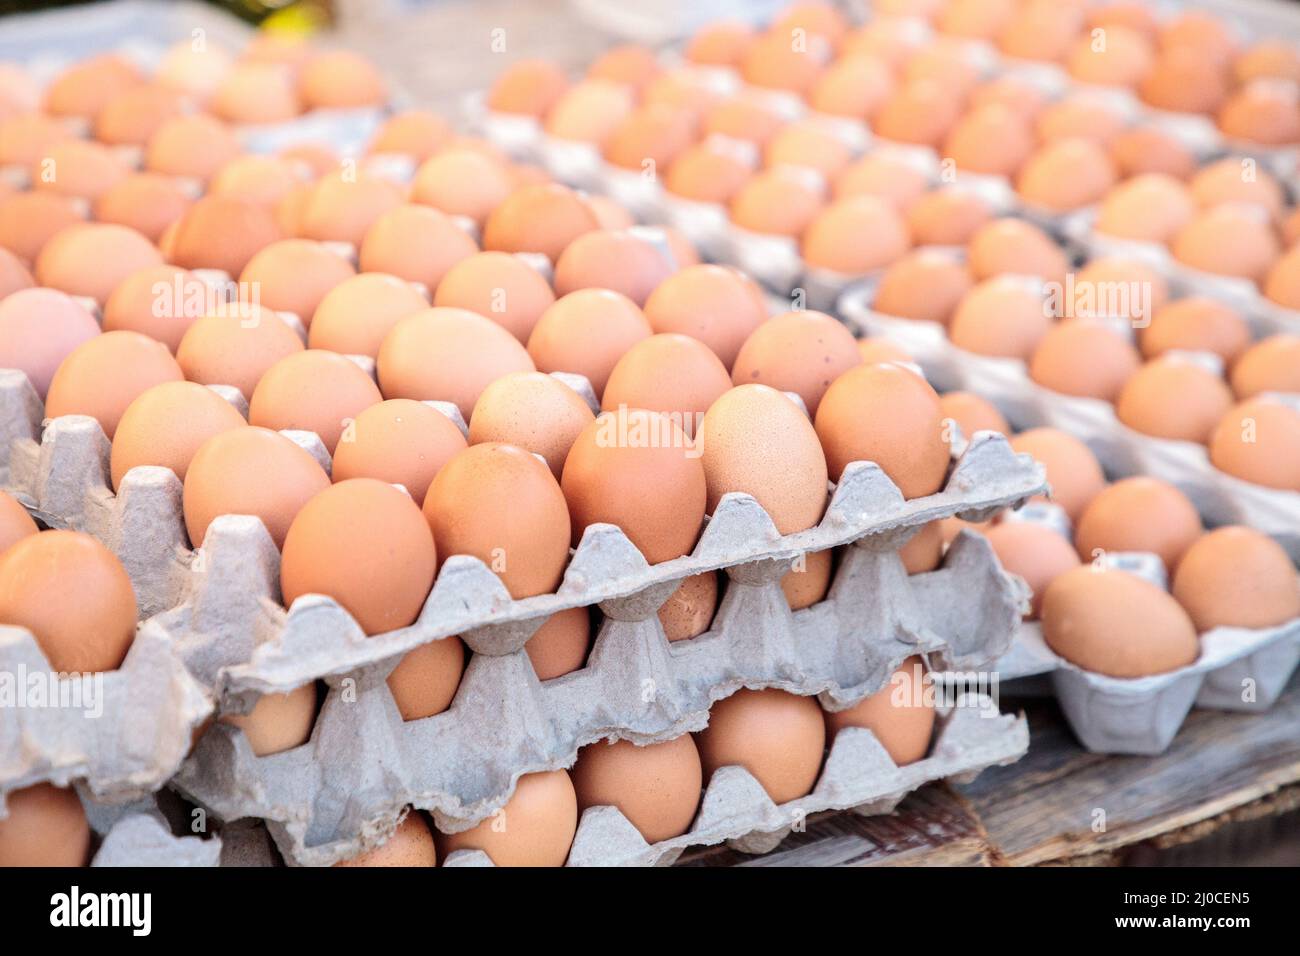 Egg Crates of brown and white eggs at a local farmers market Stock Photo